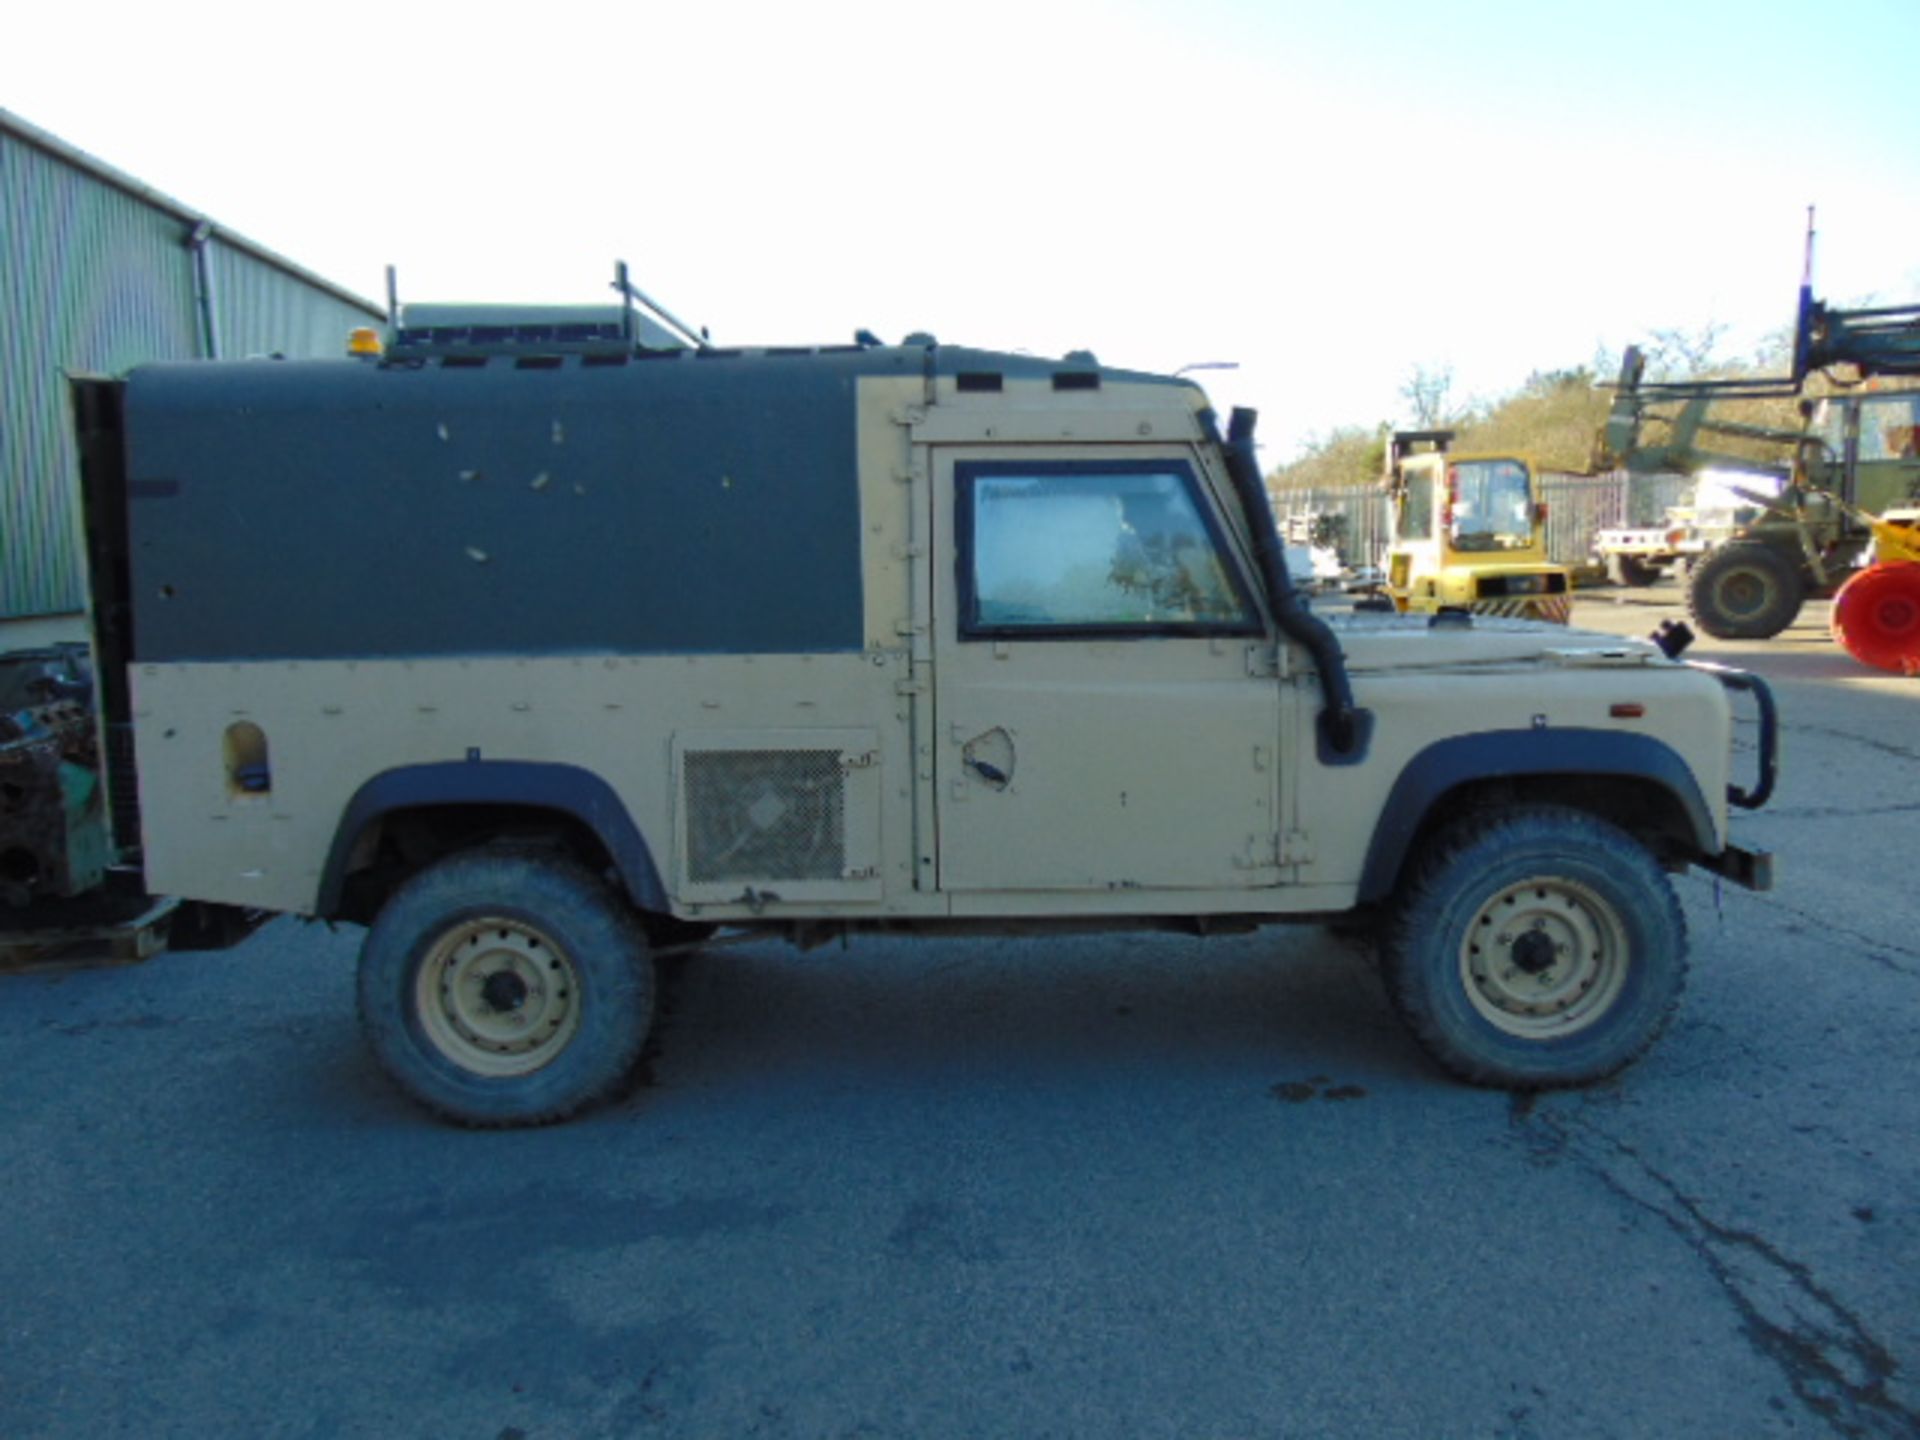 Very Rare Direct from Service Unmanned Landrover 110 300TDi Panama Snatch-2A - Image 5 of 14